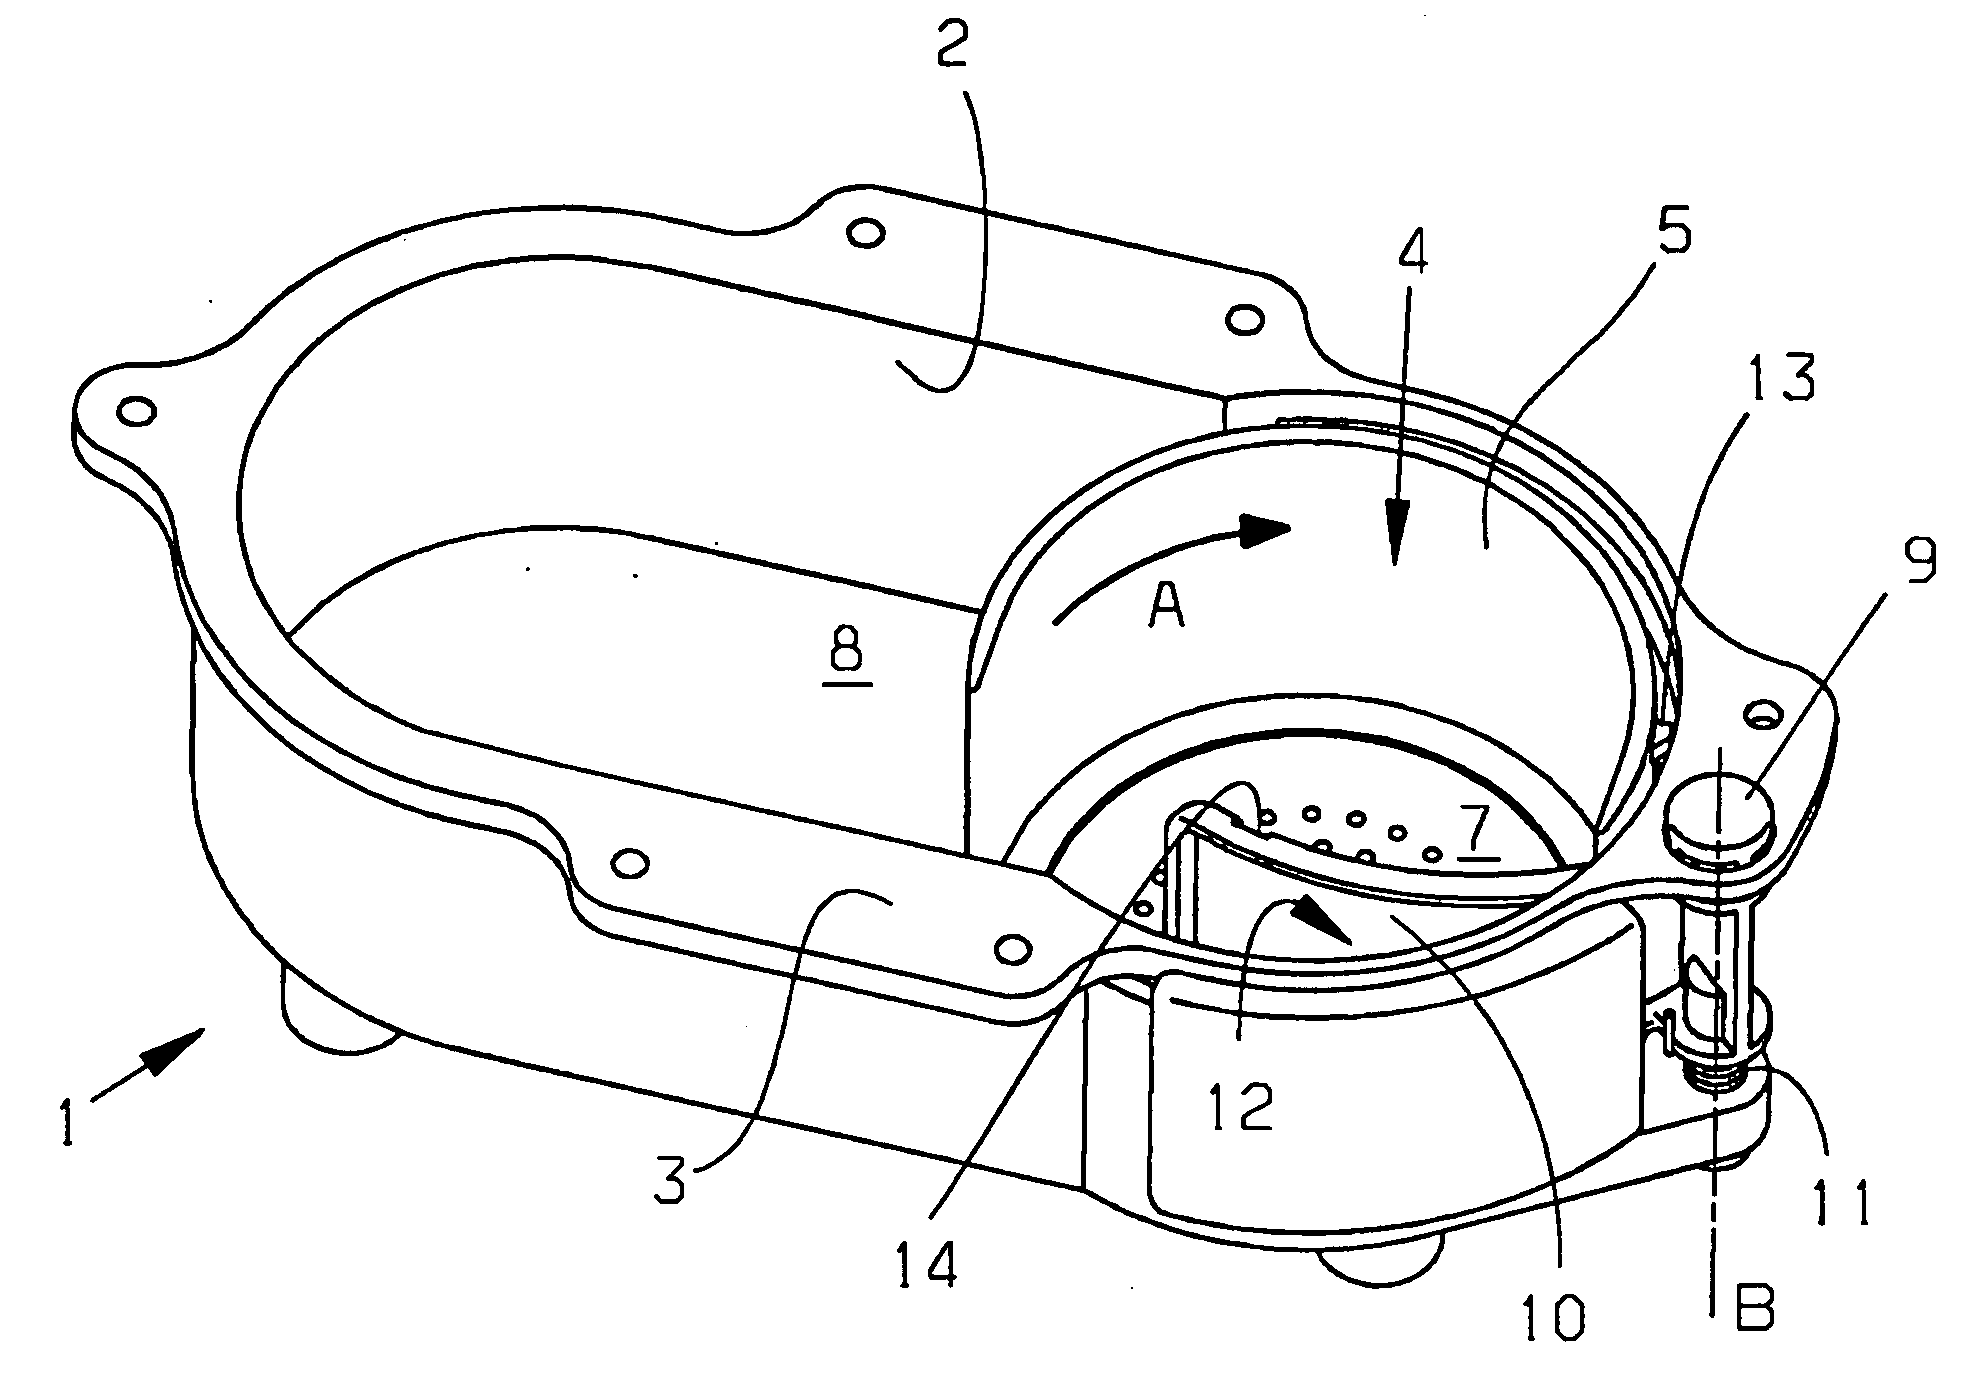 Holder for a beverage container